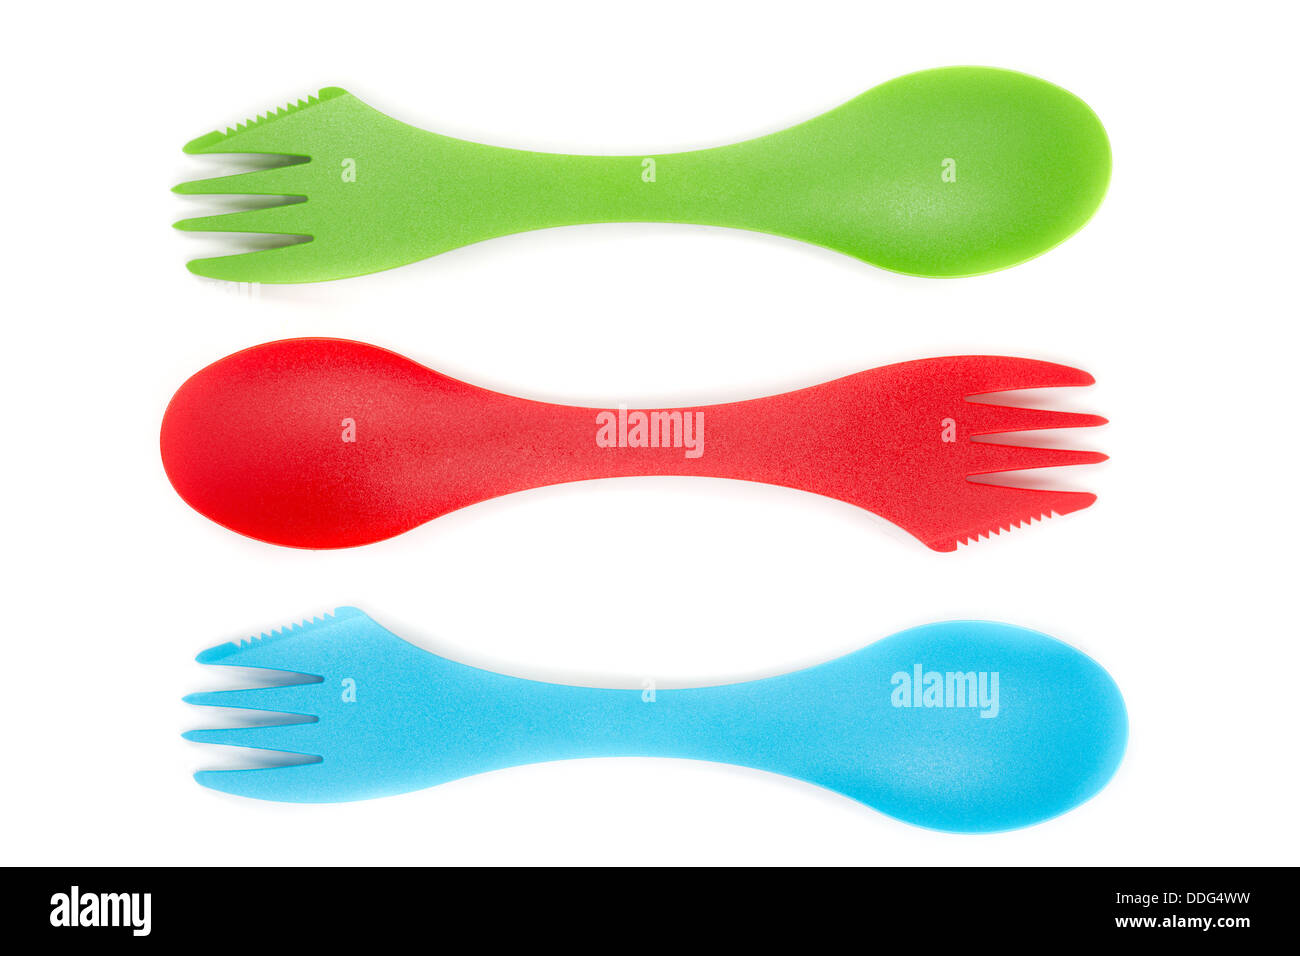 Kitchen utensil for outdoor pursuits. Aircraft quality plastic, durable, 3 in 1 utensil. Stock Photo